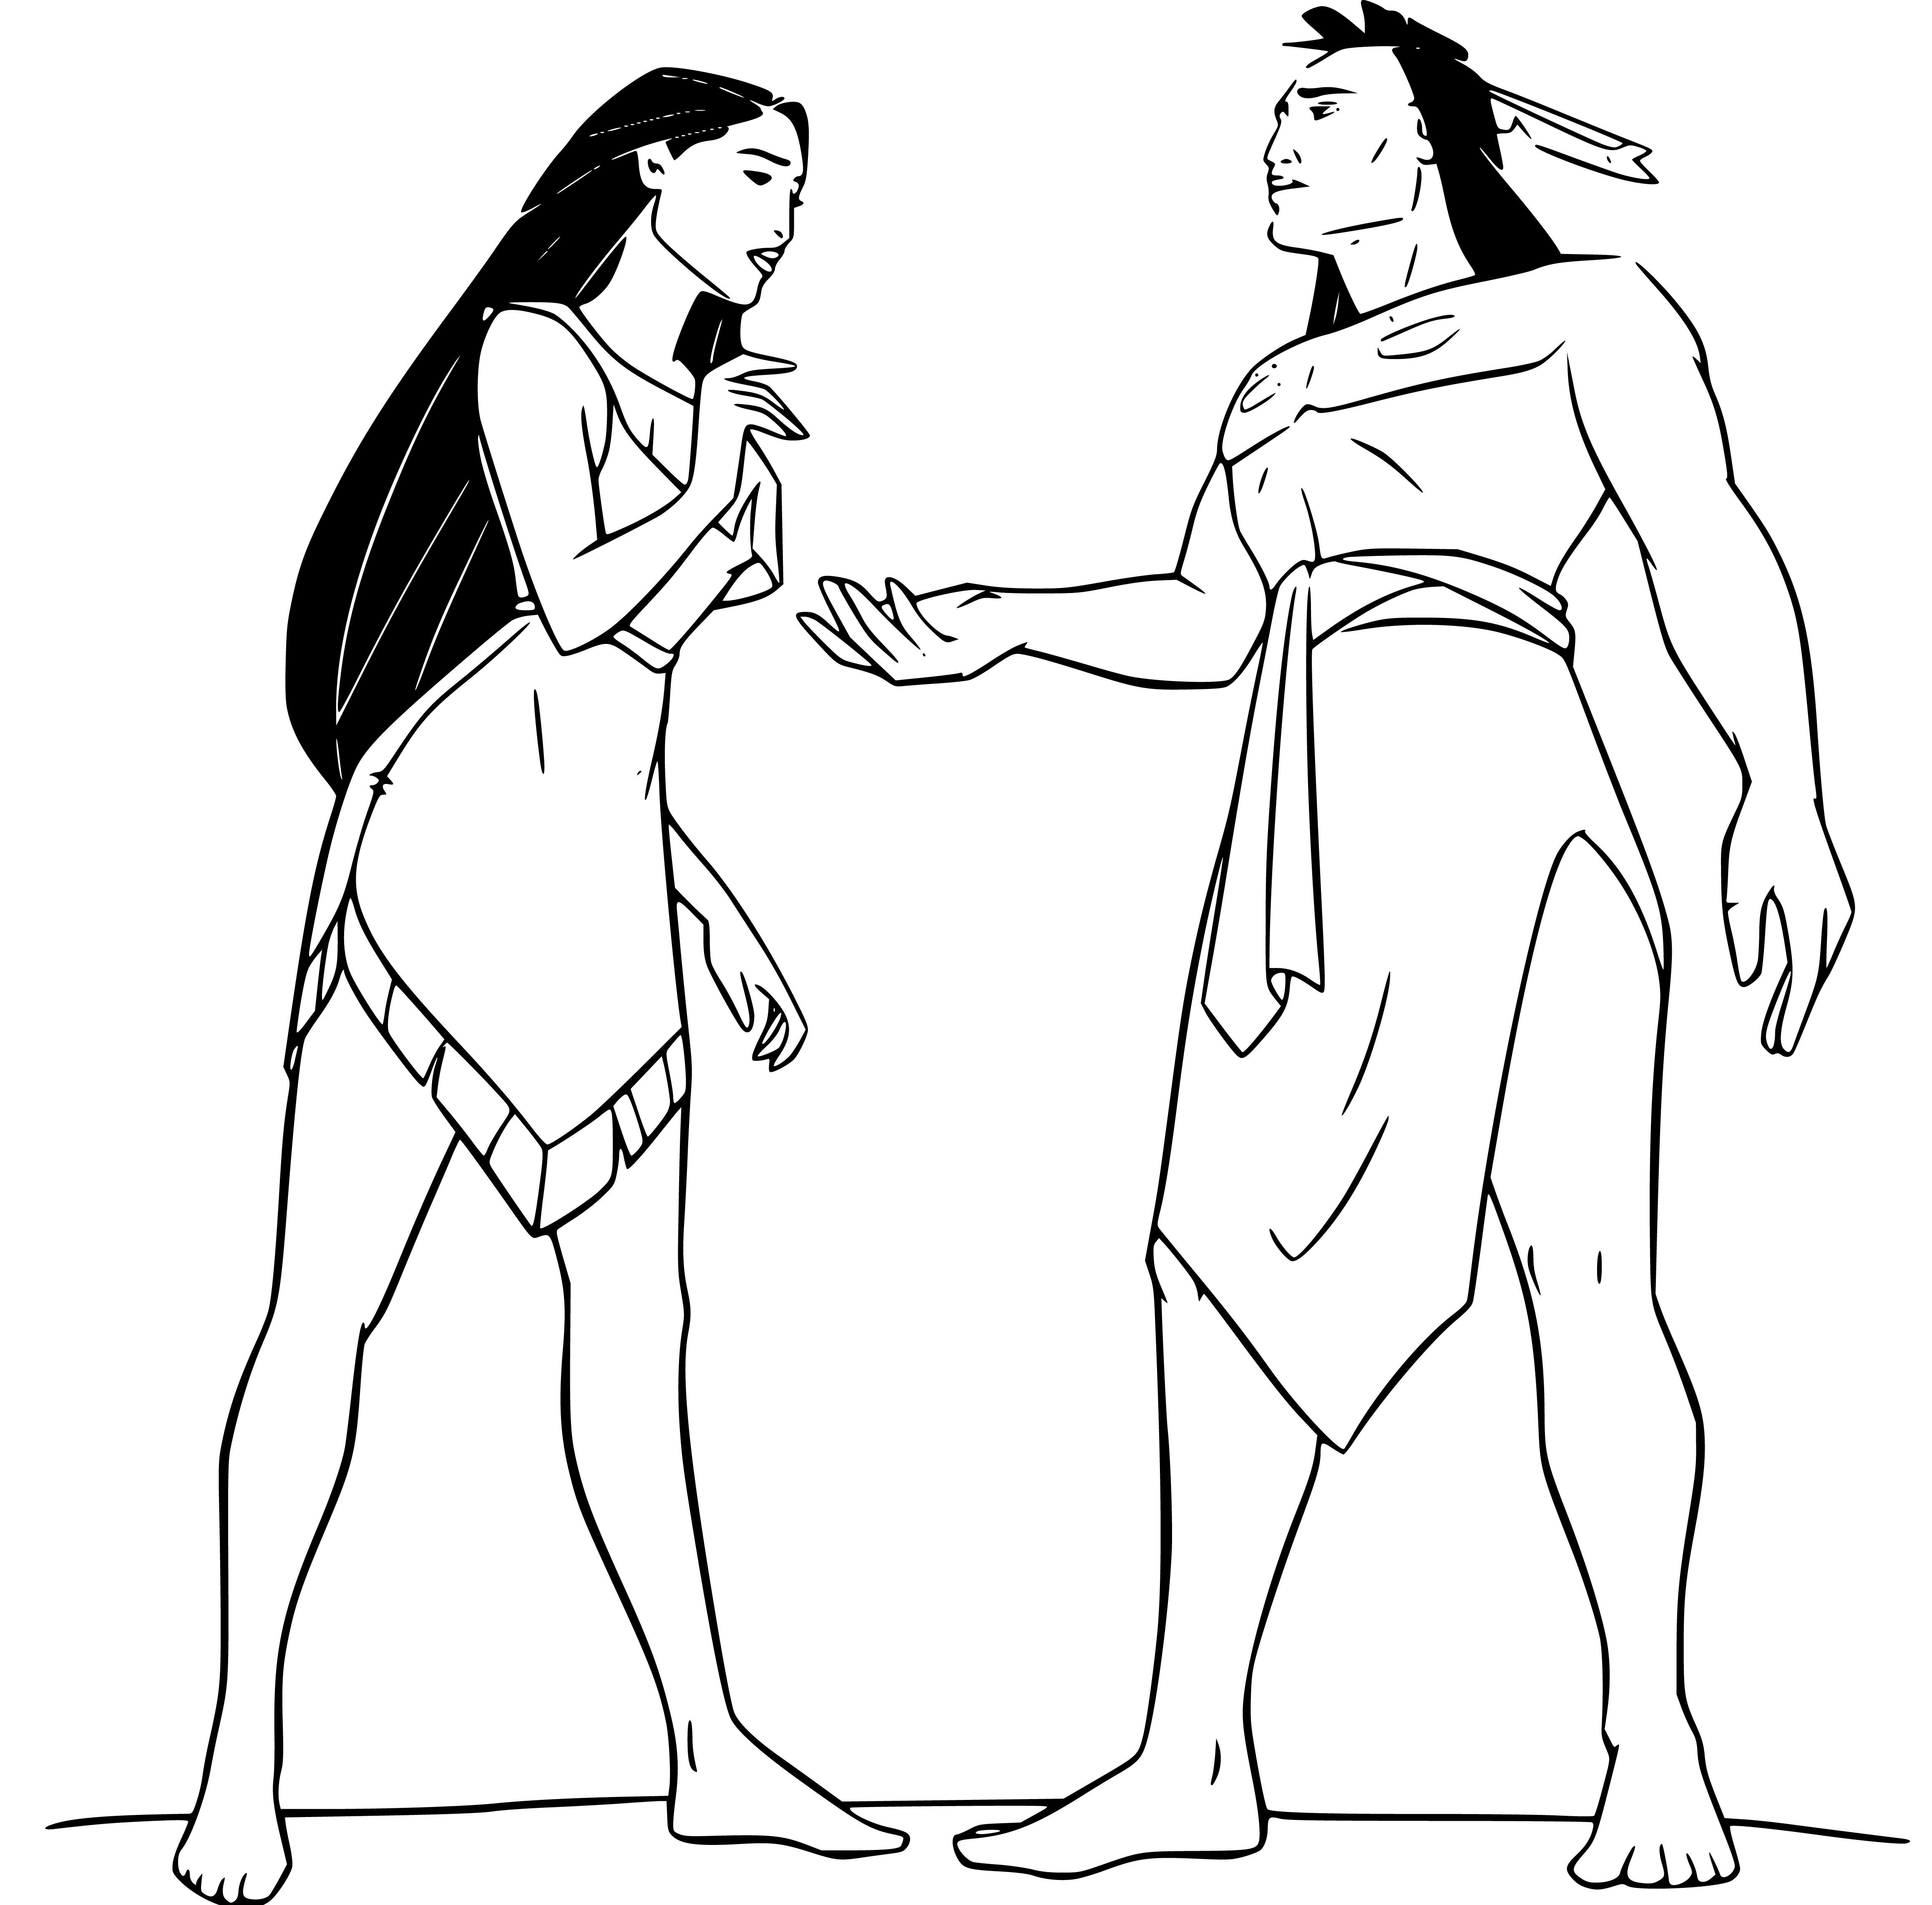 Printable Kocoum and Pocahontas Coloring Page for kids.